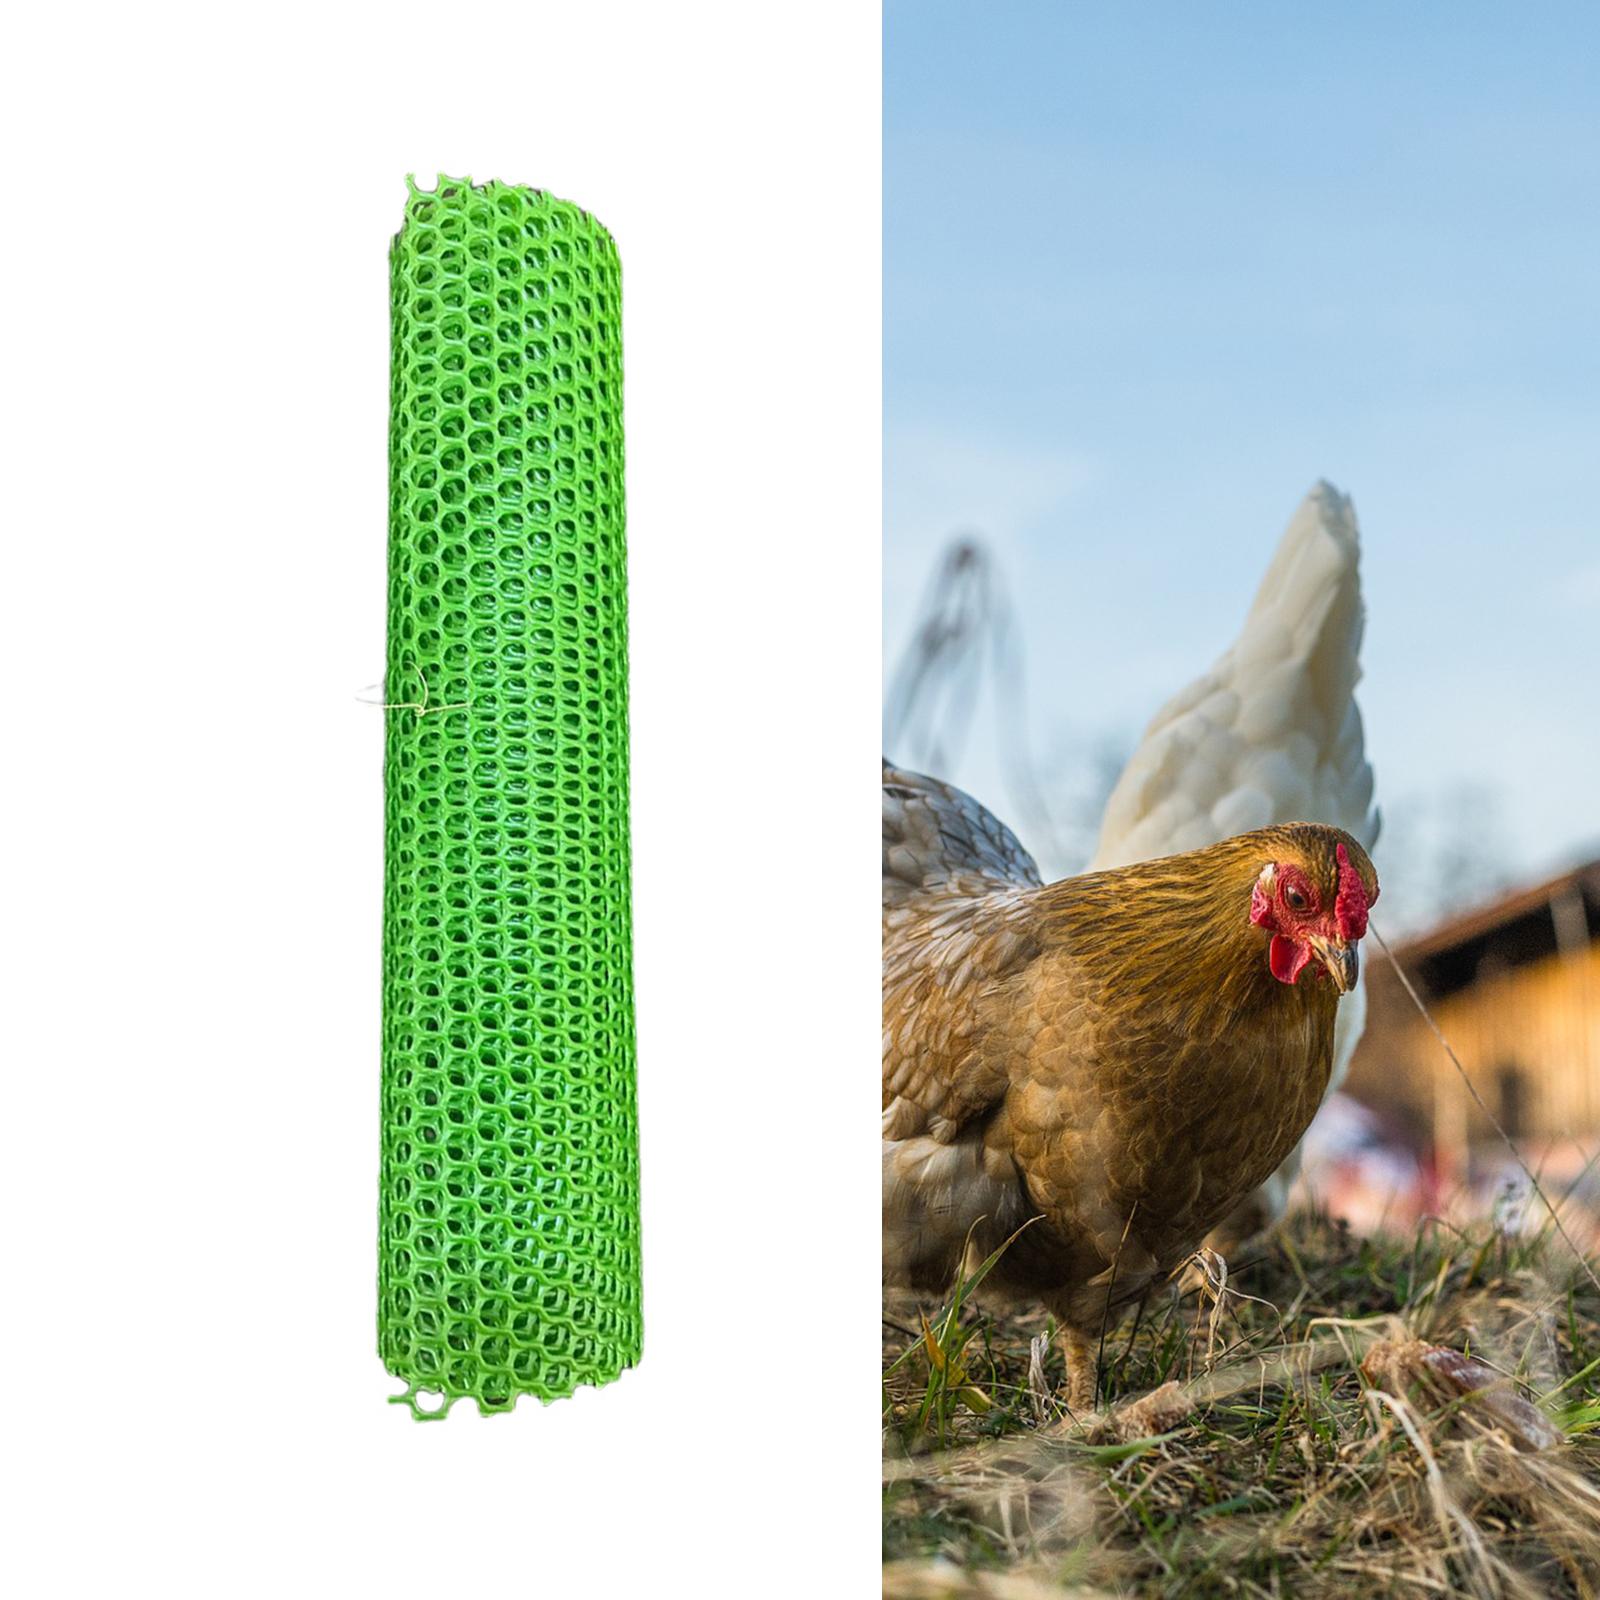 Chicken Wire Net DIY Projects Poultry Fencing Protective Crafts for Fence Green